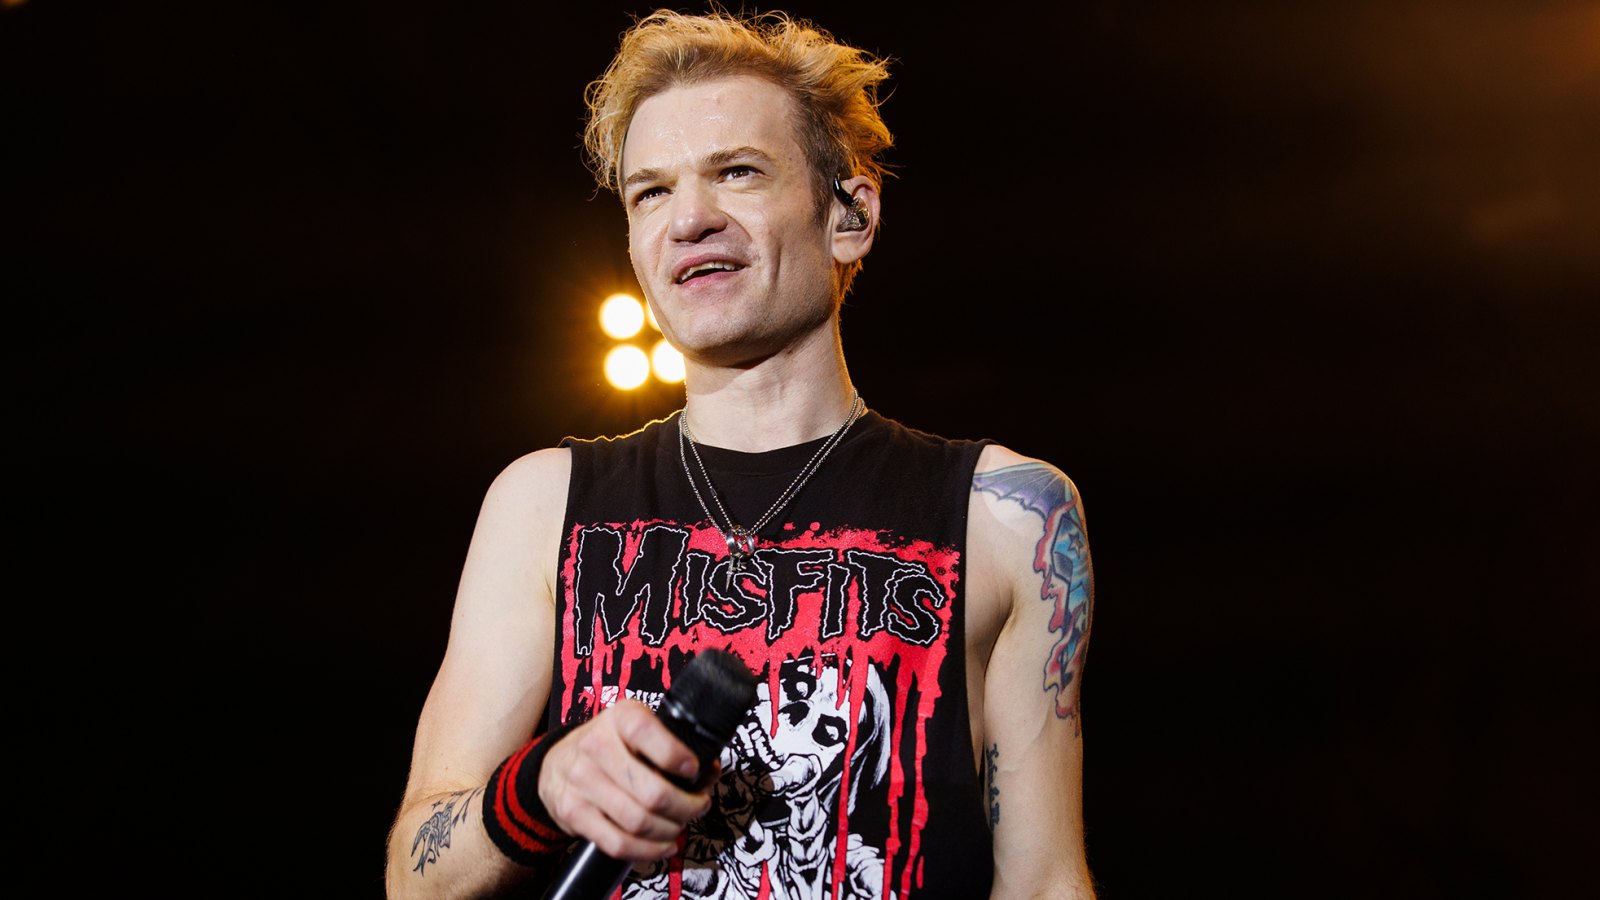 Sum 41 Singer Deryck Whibley Discharged From Hospital, Wife Ari Says